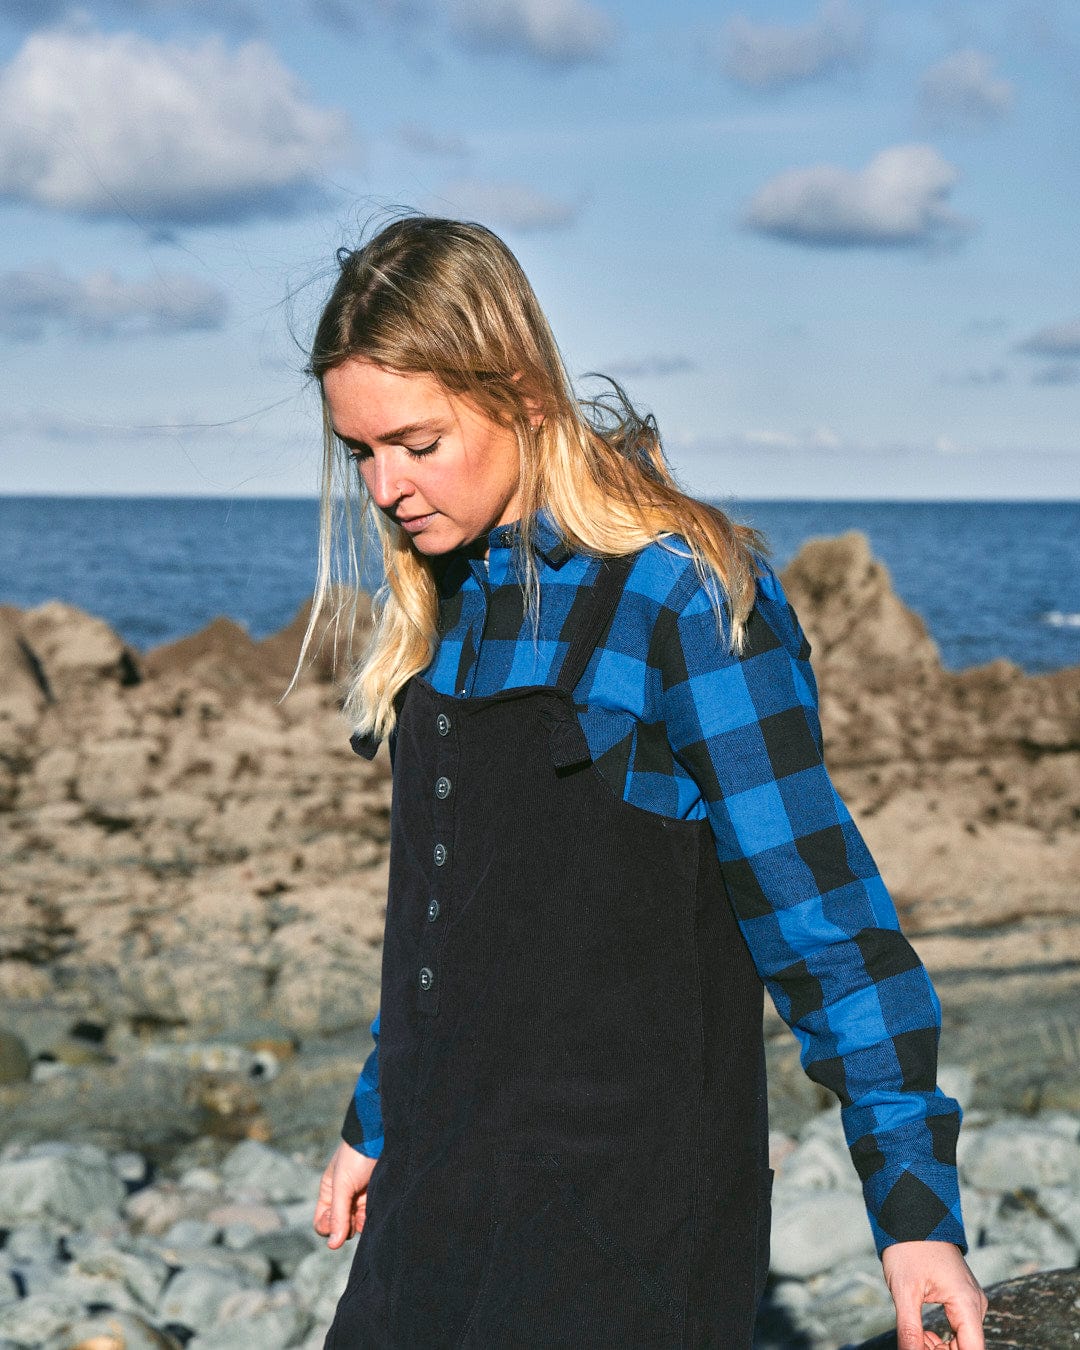 A fashion-conscious woman with long blonde hair, wearing a Nancy - Womens Cord Jumpsuit - Dark Blue by Saltrock and a blue plaid shirt, walks on a rocky beach with the ocean and a partly cloudy sky in the background.